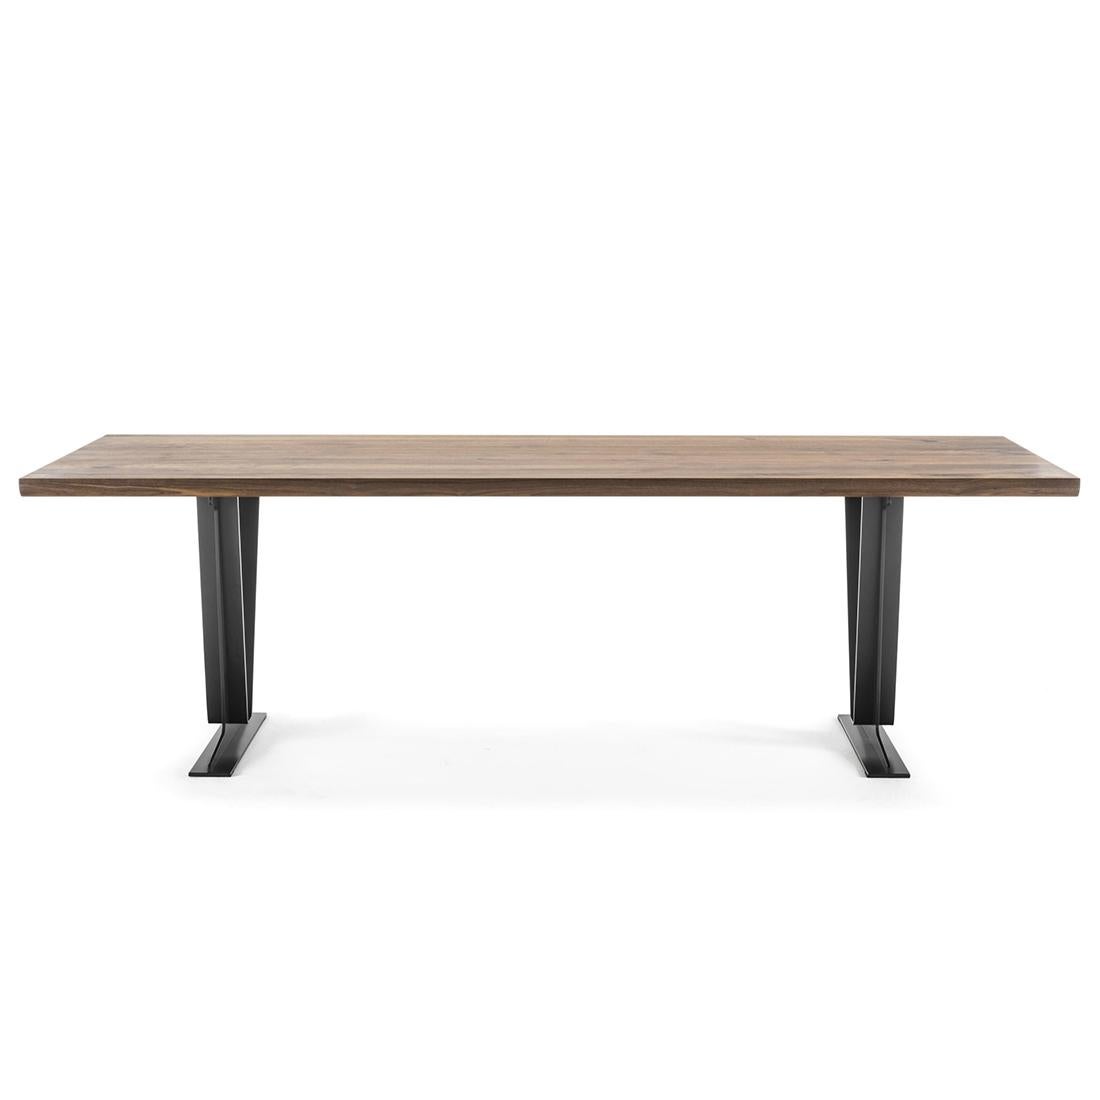 Dining table walnut V shape with solid natural walnut 
wood top with glued slats and with rounded edges,. 
With iron base lacquered in grey finish.
Available in: 
L 200 x D 100 x H 74cm, price: 8200,00€
L 220 x D 100 x H 74cm, price: 8700,00€
L 240